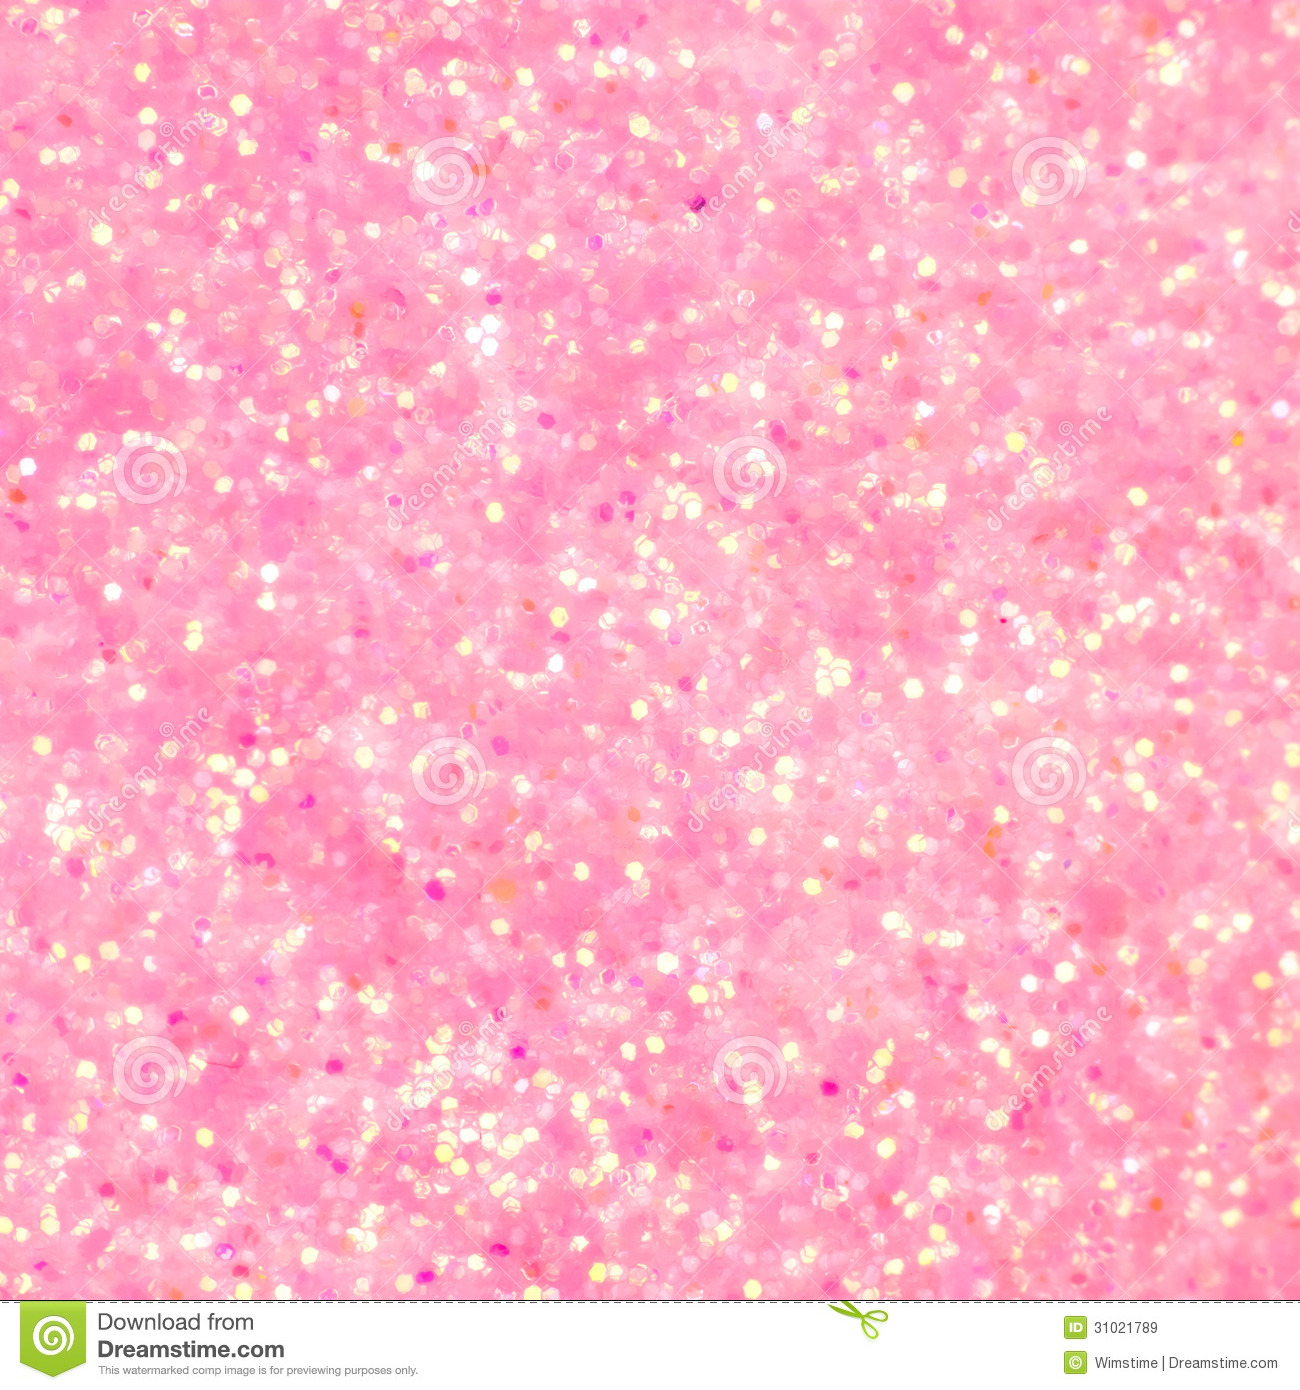 Pink Glitter Royalty Free Stock Images   Image 31021789